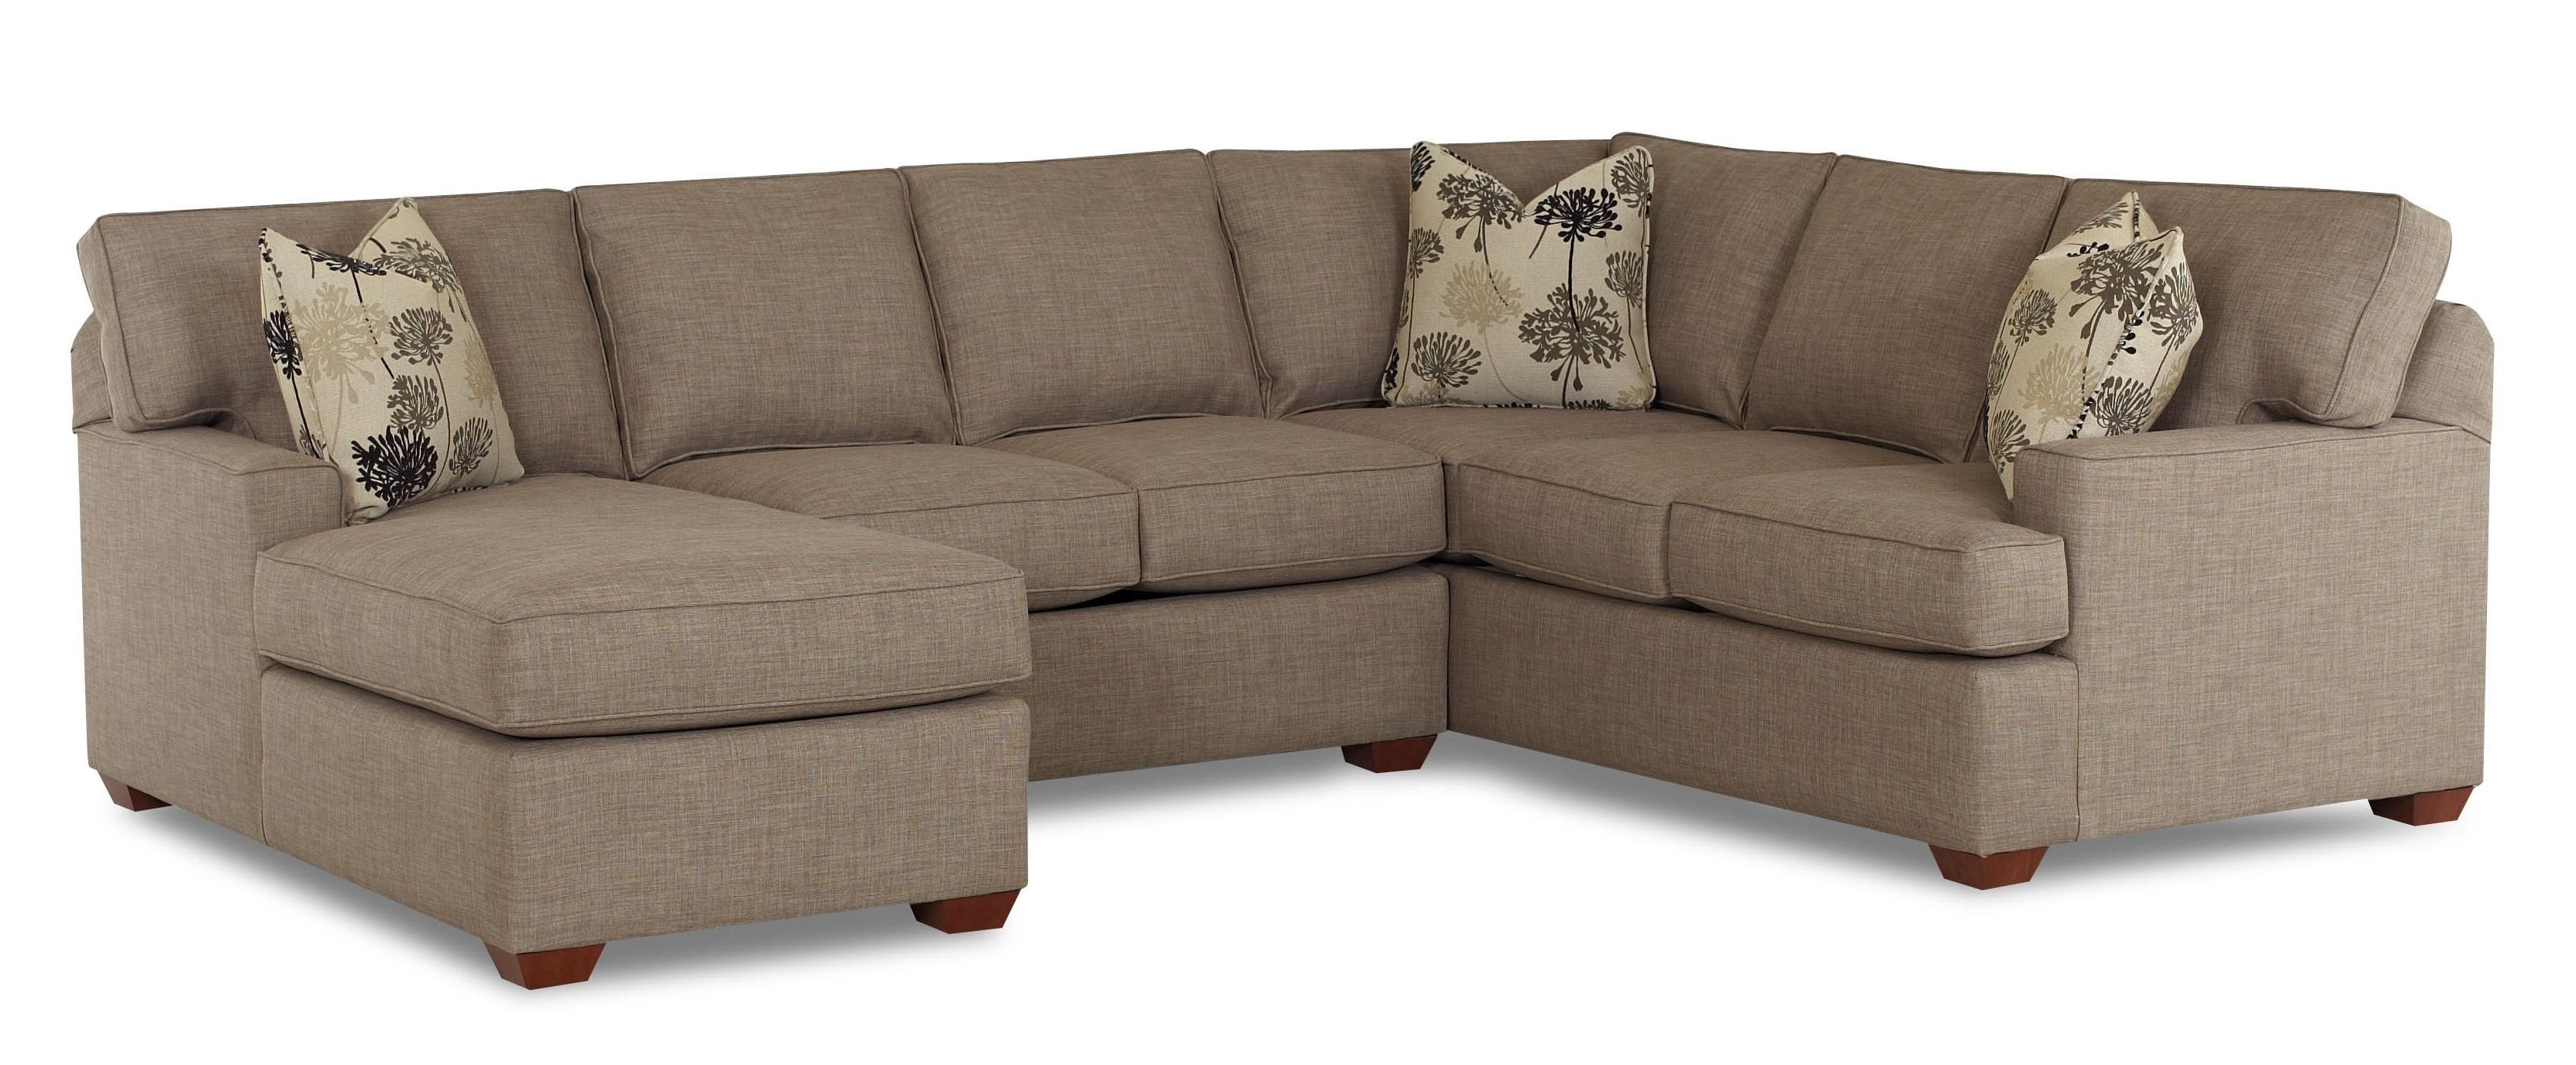 Pantego 3 Piece Sectional Sofa With Raf Chaiseklaussner | Home Inside Johnny Janosik Sectional Sofas (View 8 of 10)